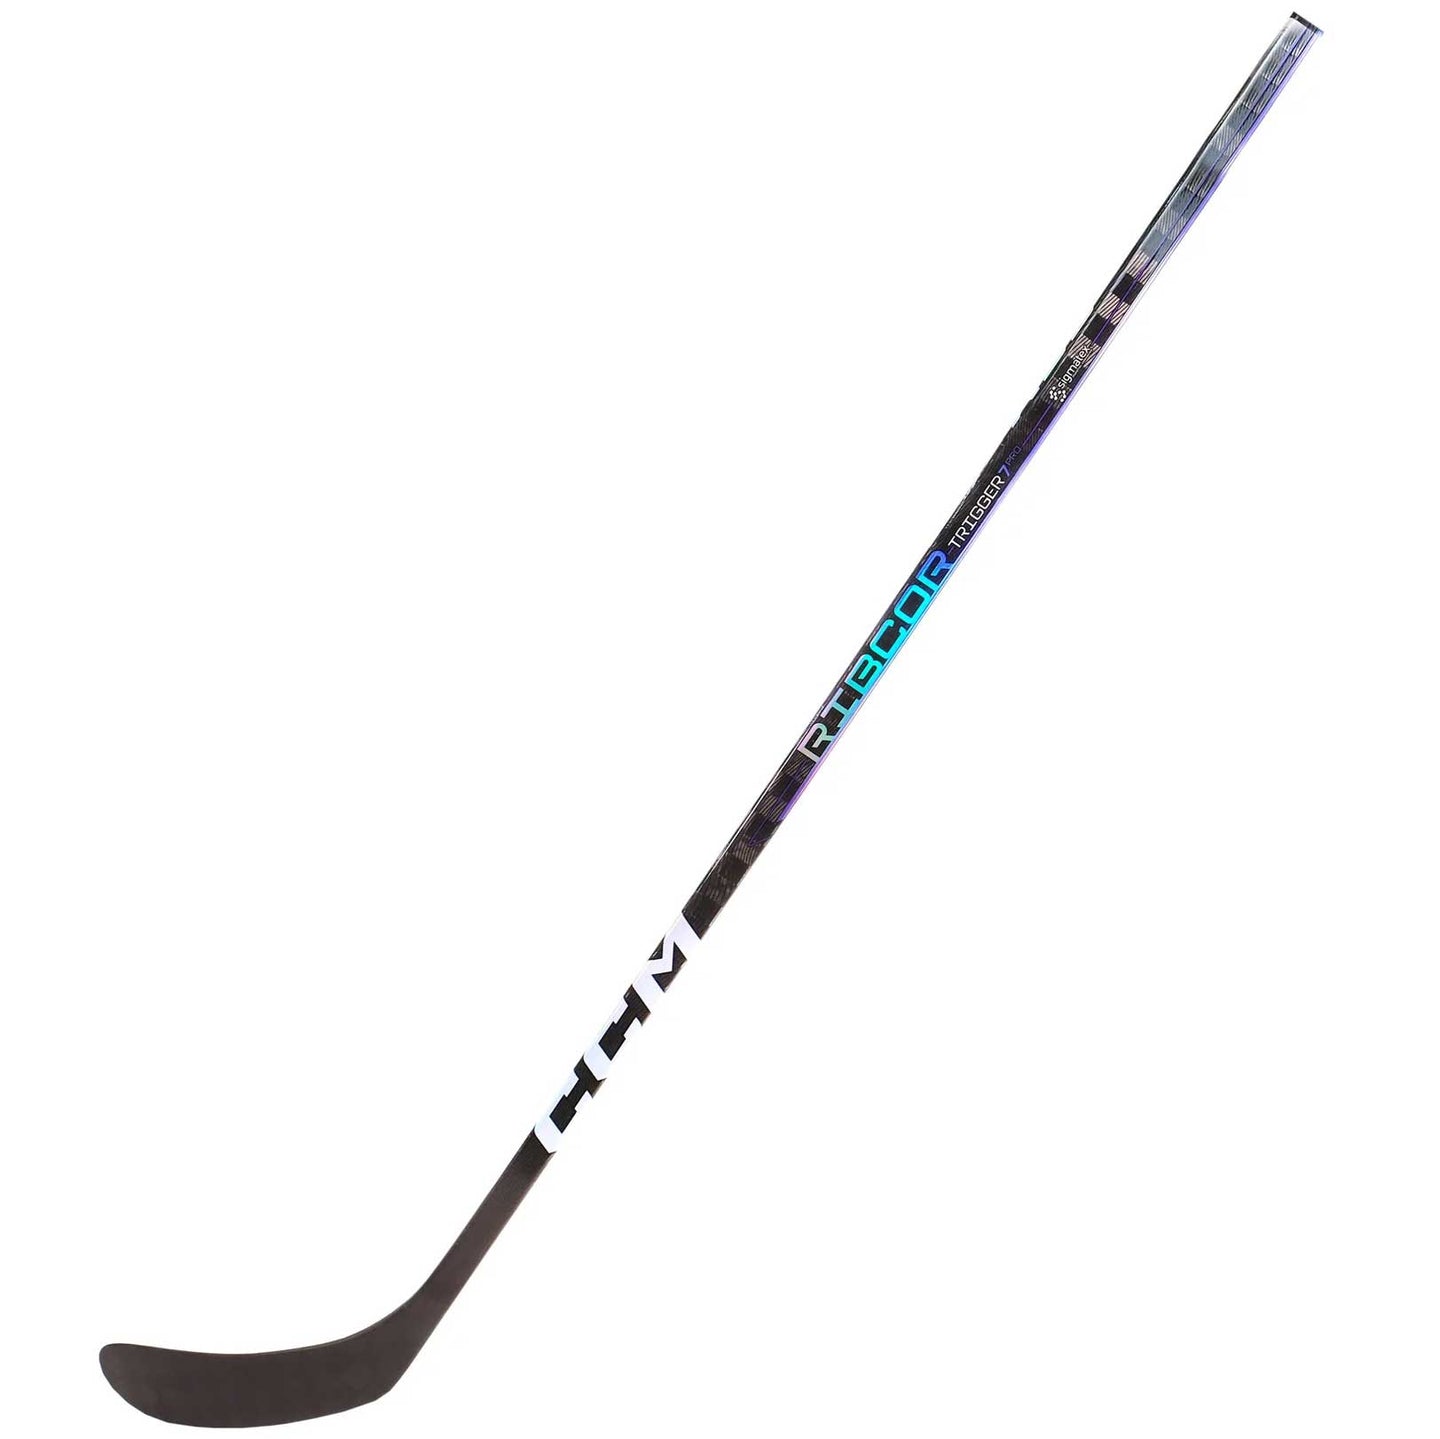 Full backhand view photo of the CCM RIBCOR Trigger 7 PRO Grip Ice Hockey Stick (Junior)